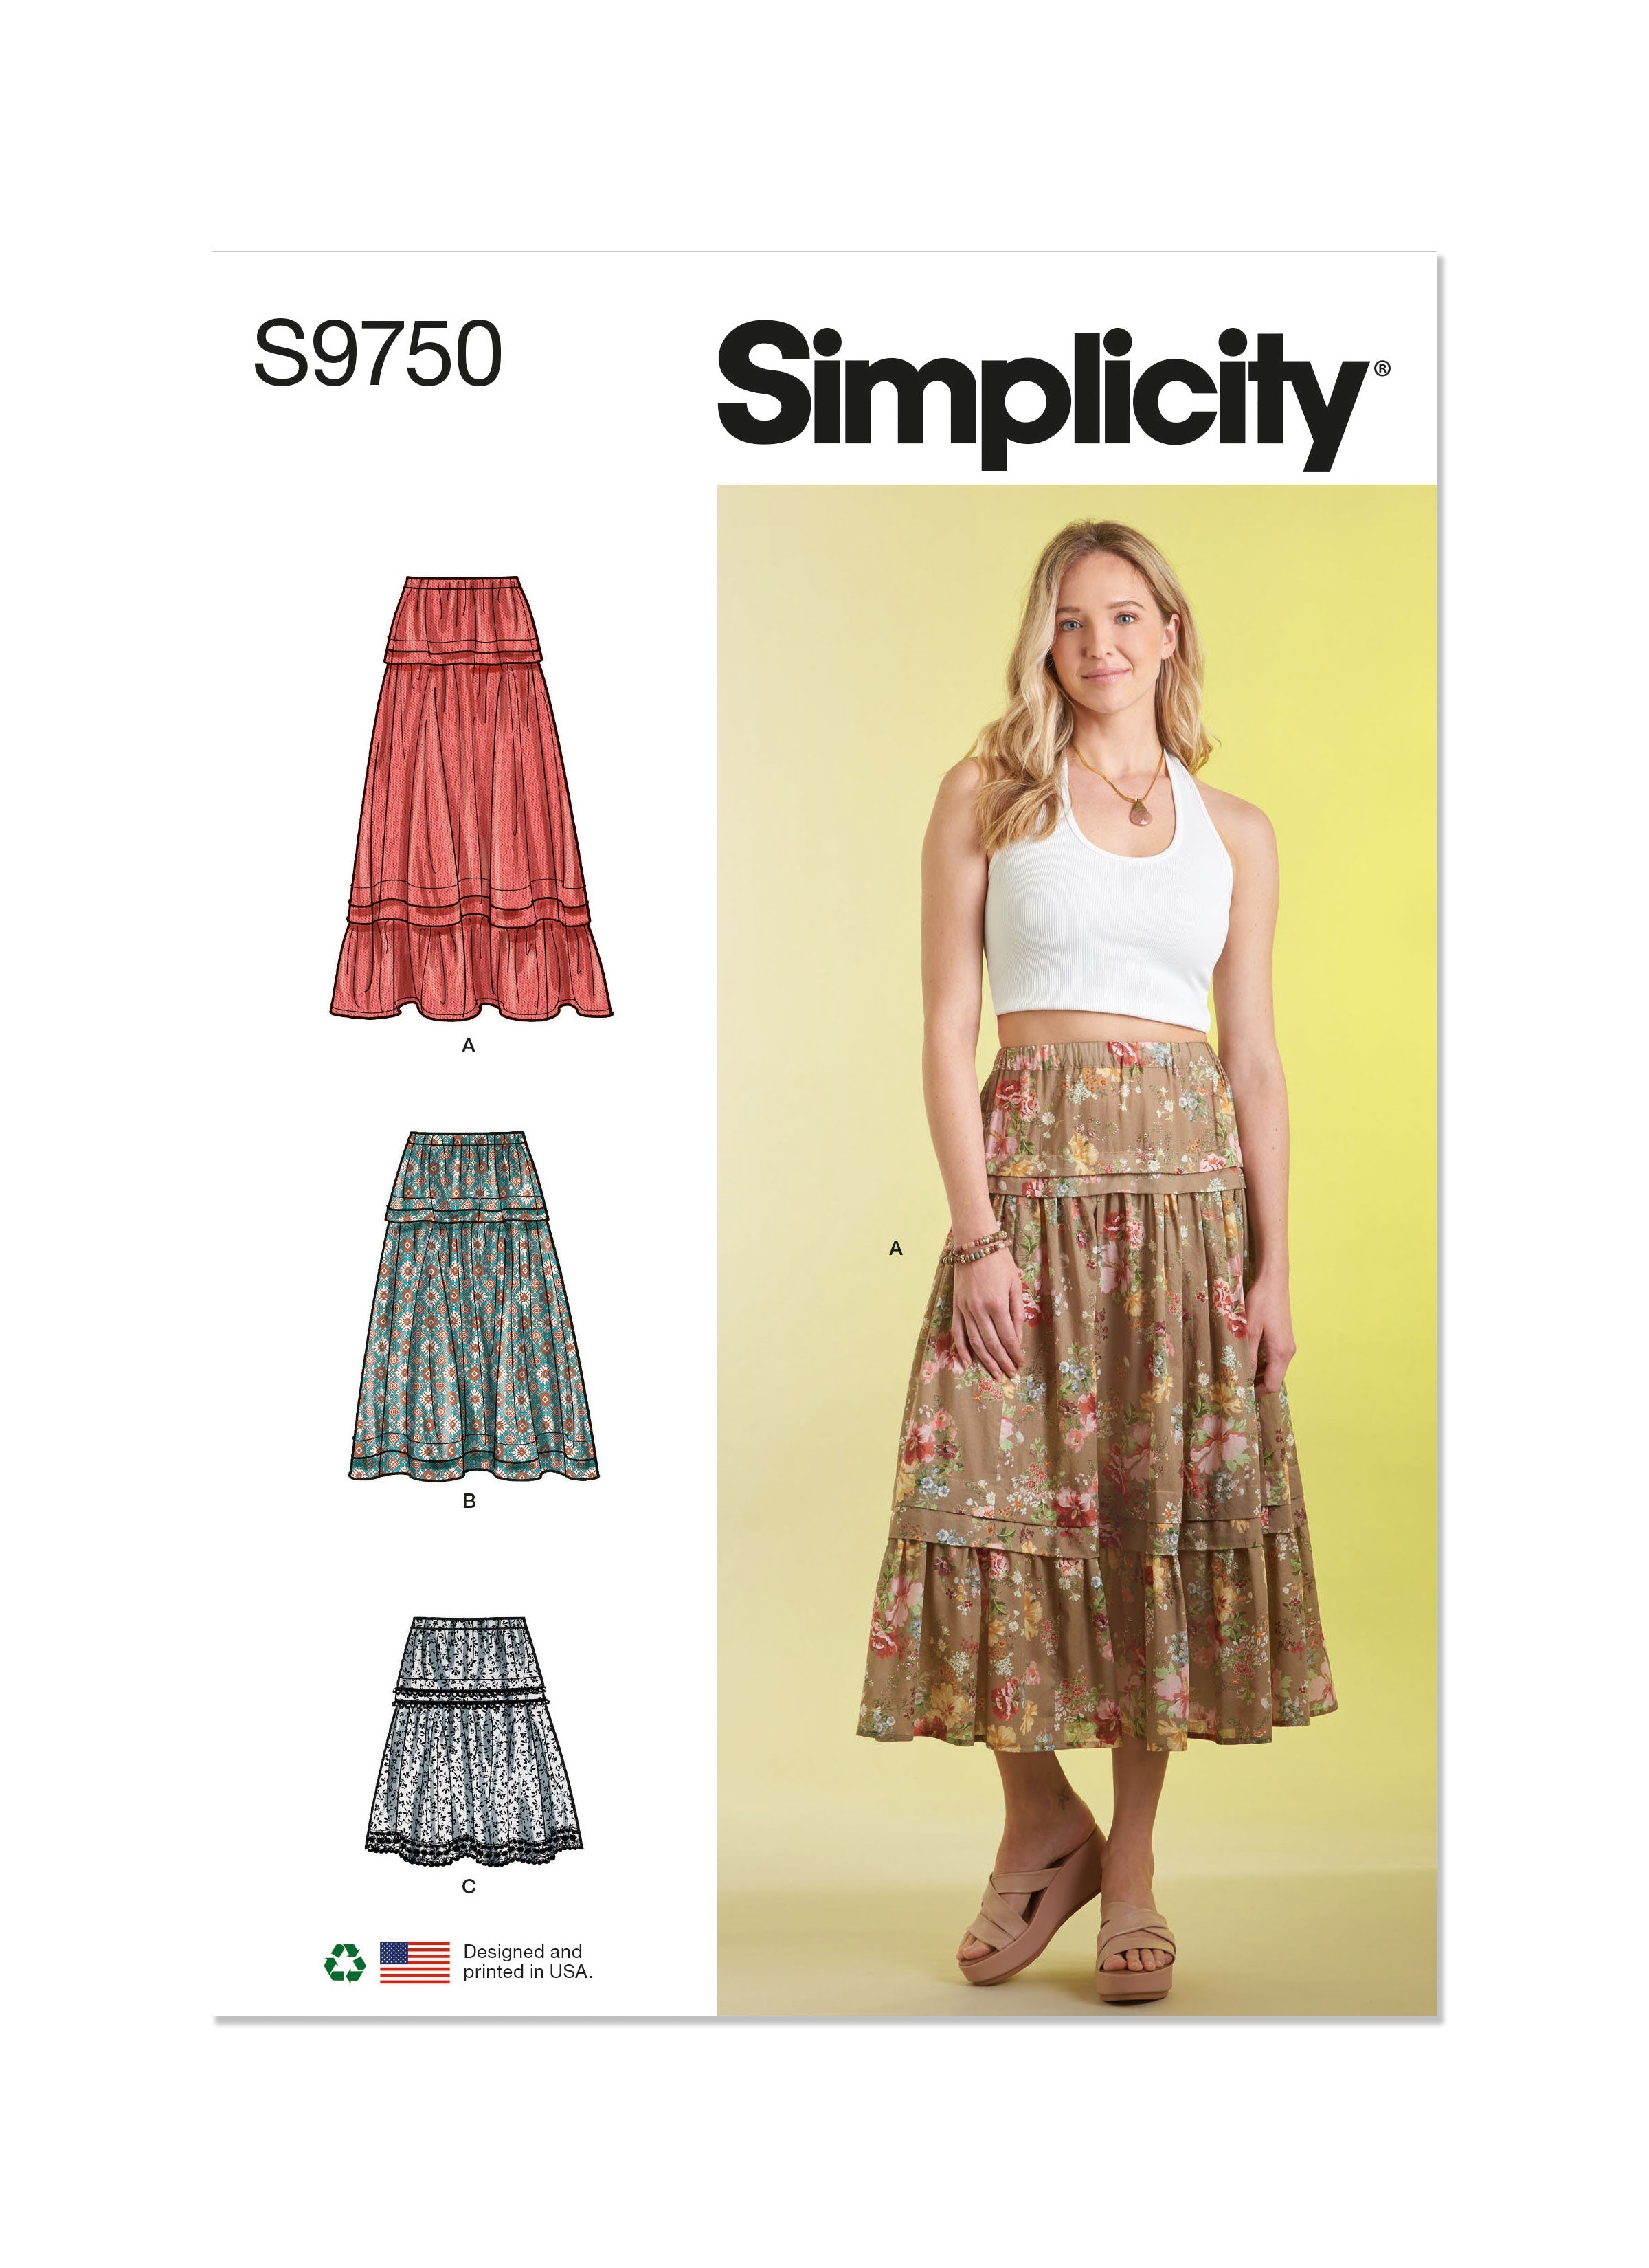 Simplicity 9750 sewing pattern Misses' Skirt in Three Lengths from Jaycotts Sewing Supplies